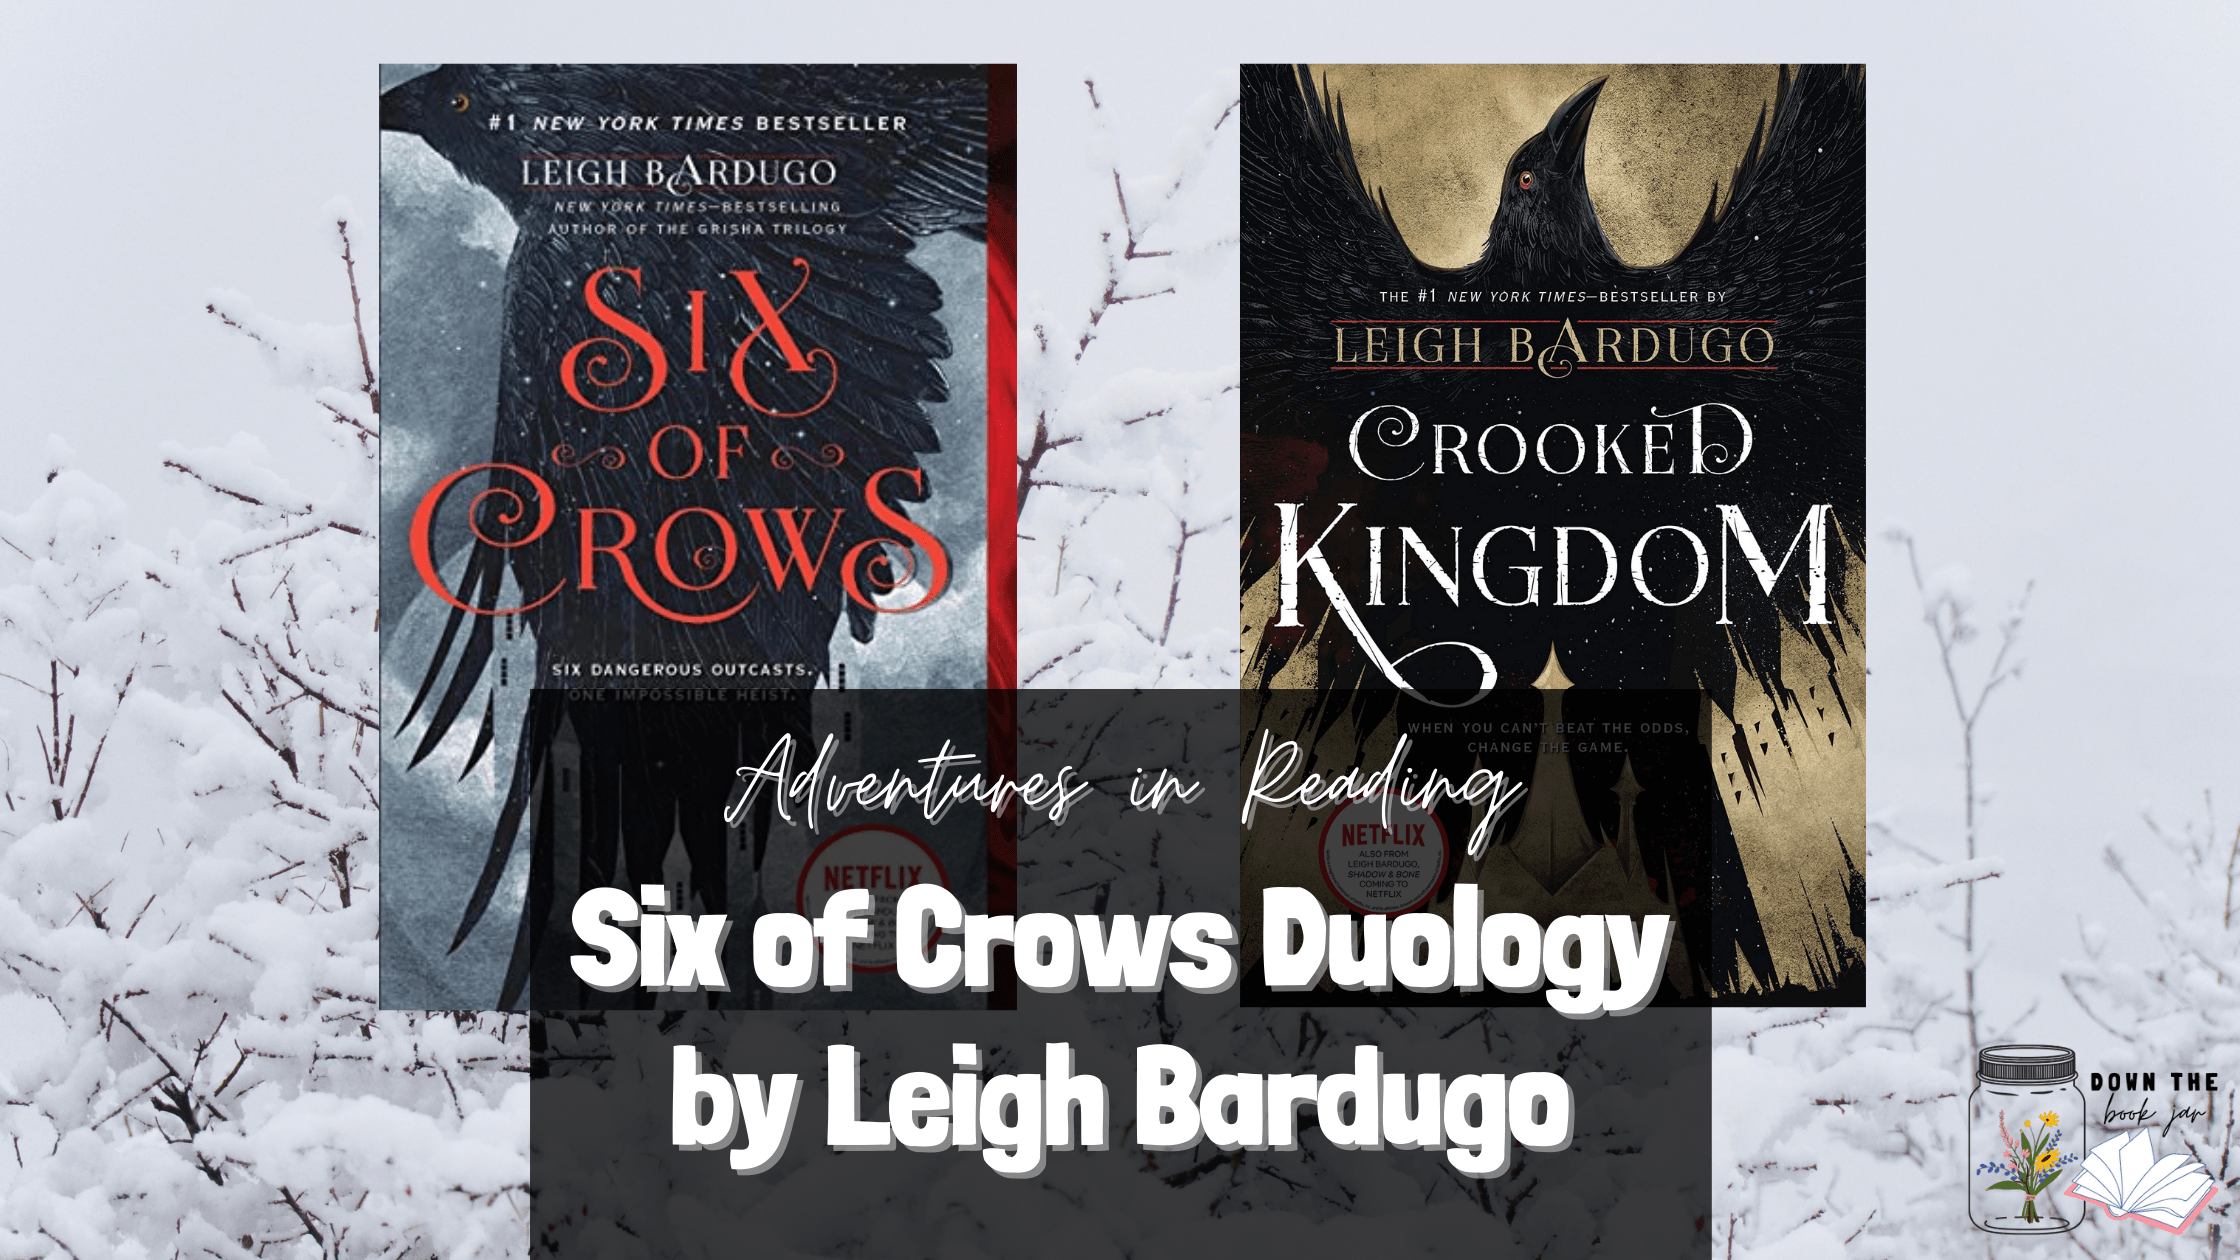 Six of Crows Duology by Leigh Bardugo